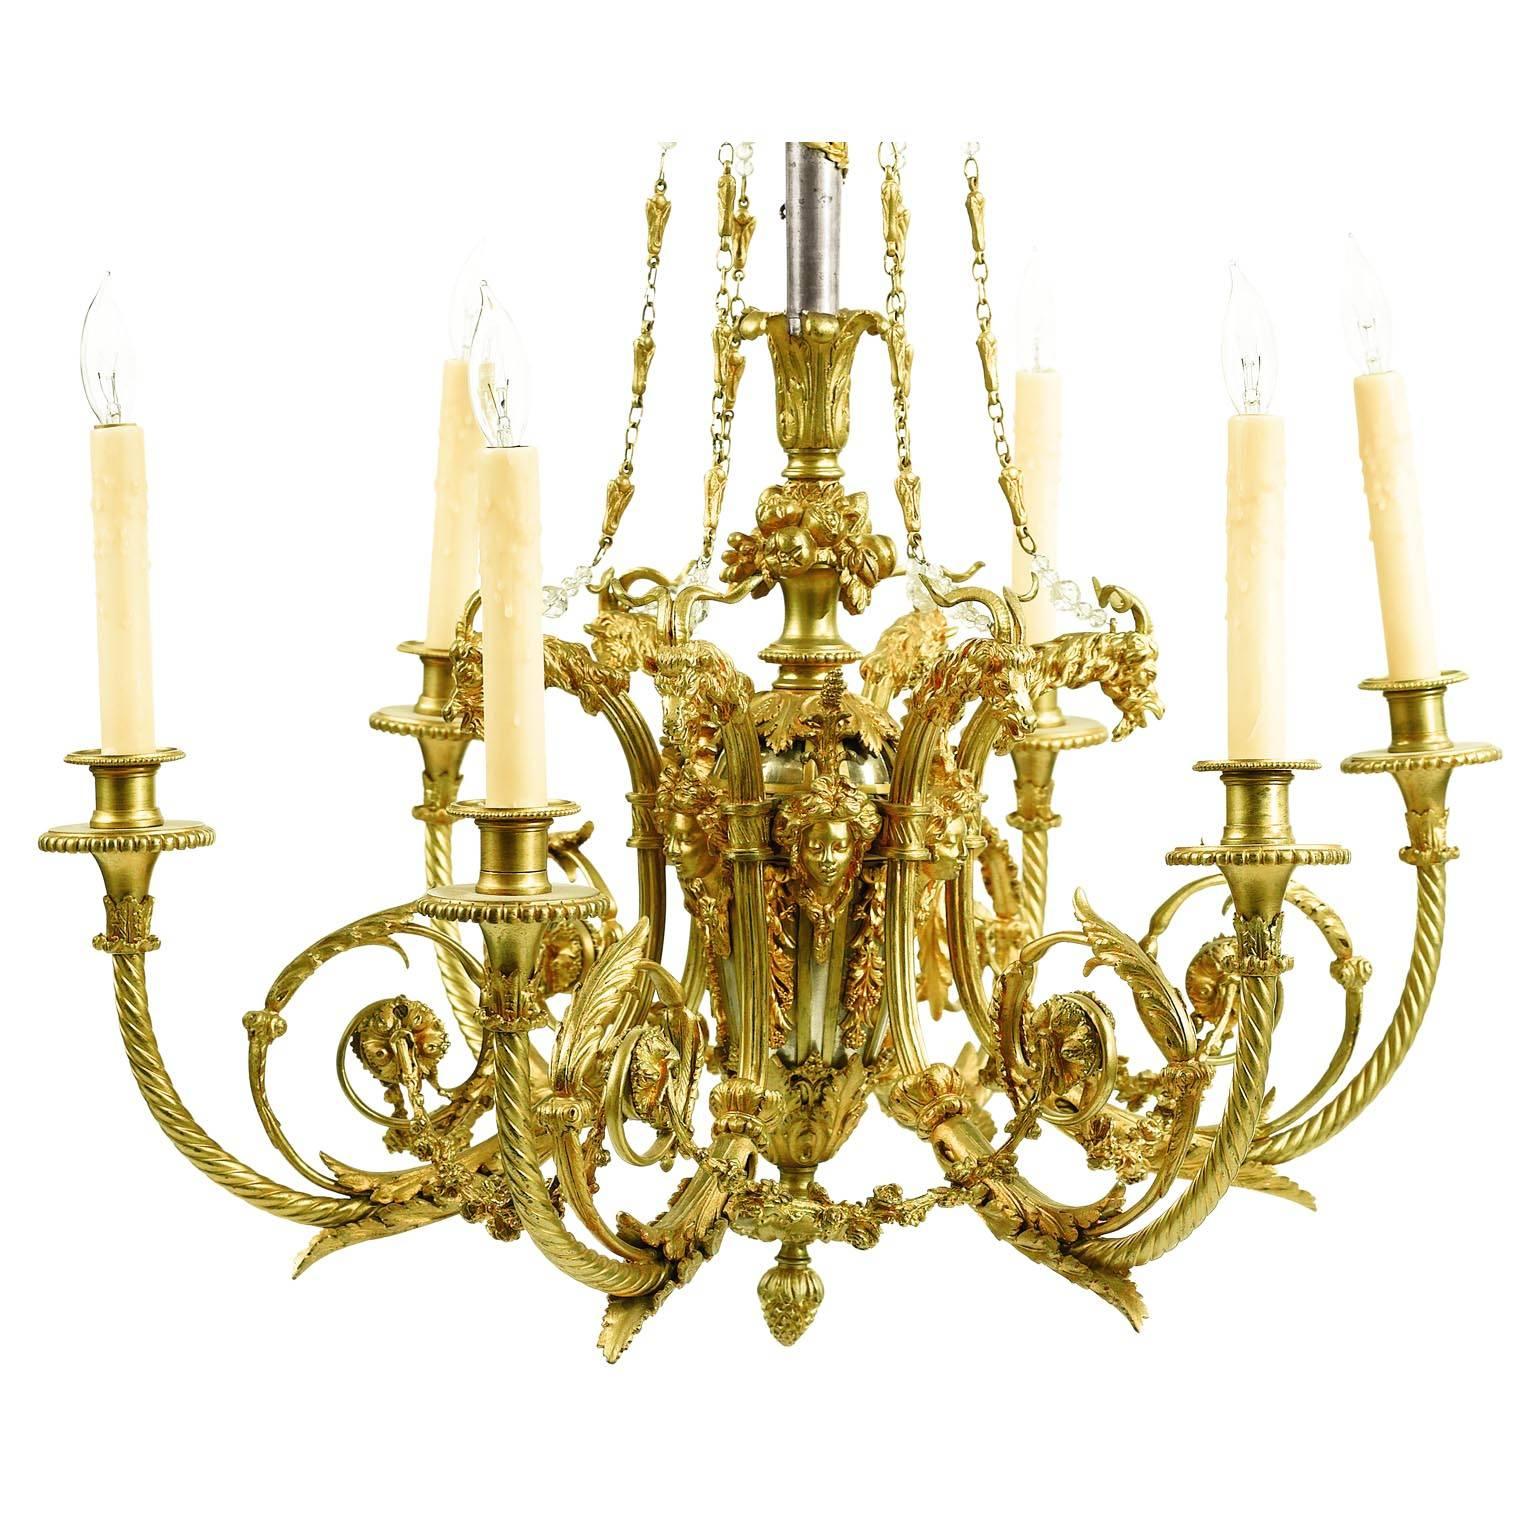 A very finely chased French 19th Century Louis XV Style gilt and steel six-light figural chandelier after a model by Pierre Gouthière (French, 1732-1813). The finely chase gilt bronze body surmounted with six scrolled and twisted candle-arms with